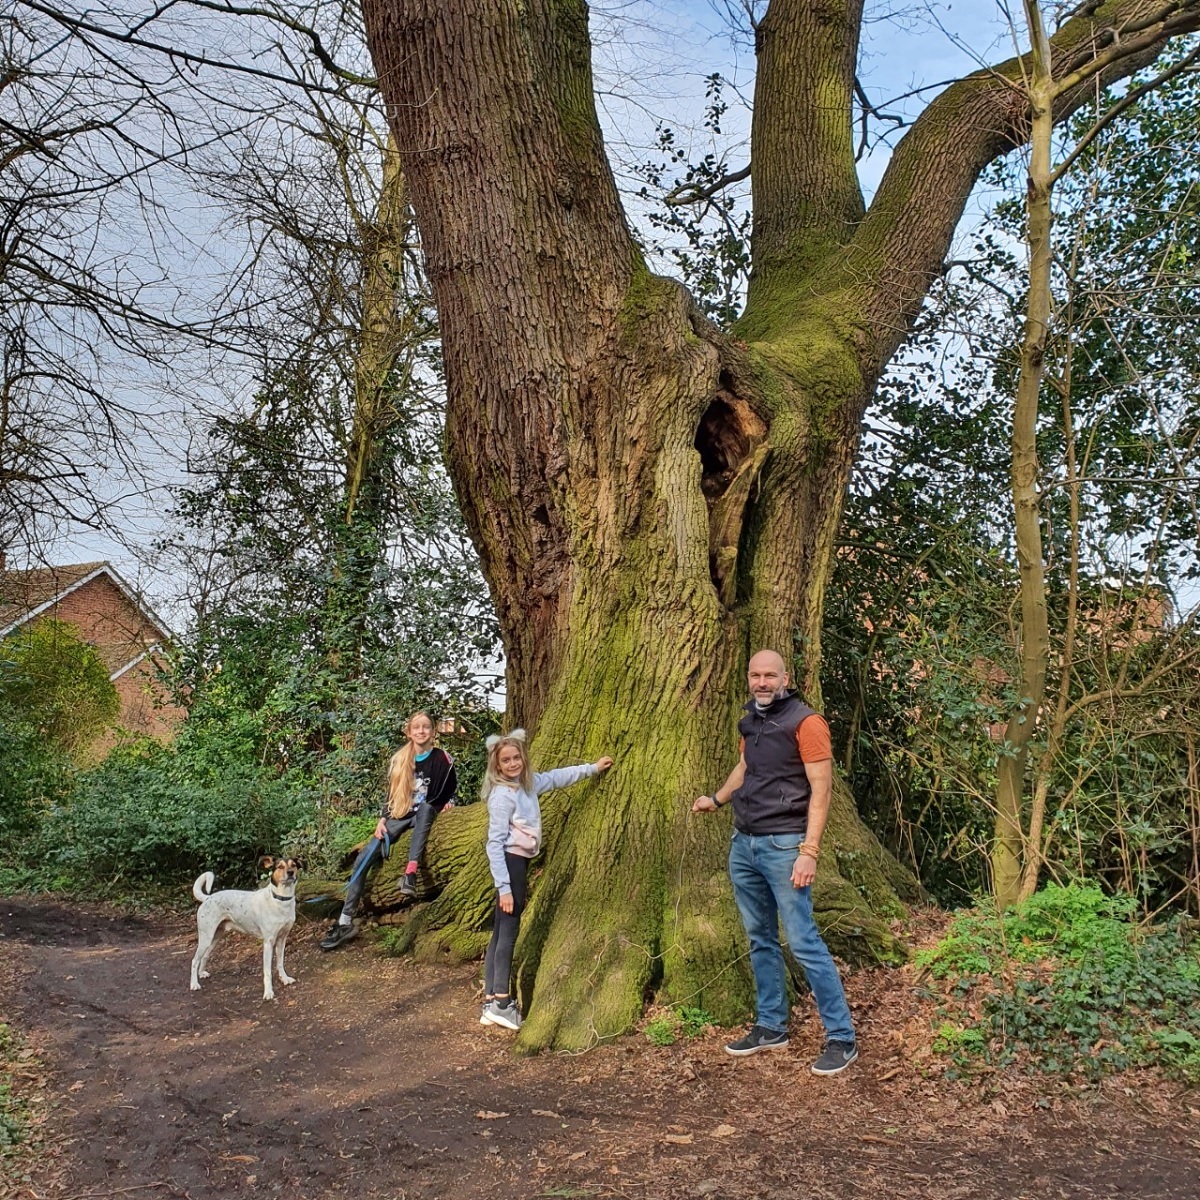 The Cranston family had a wonderful time measuring up a massive oak along the path where they walk their dog